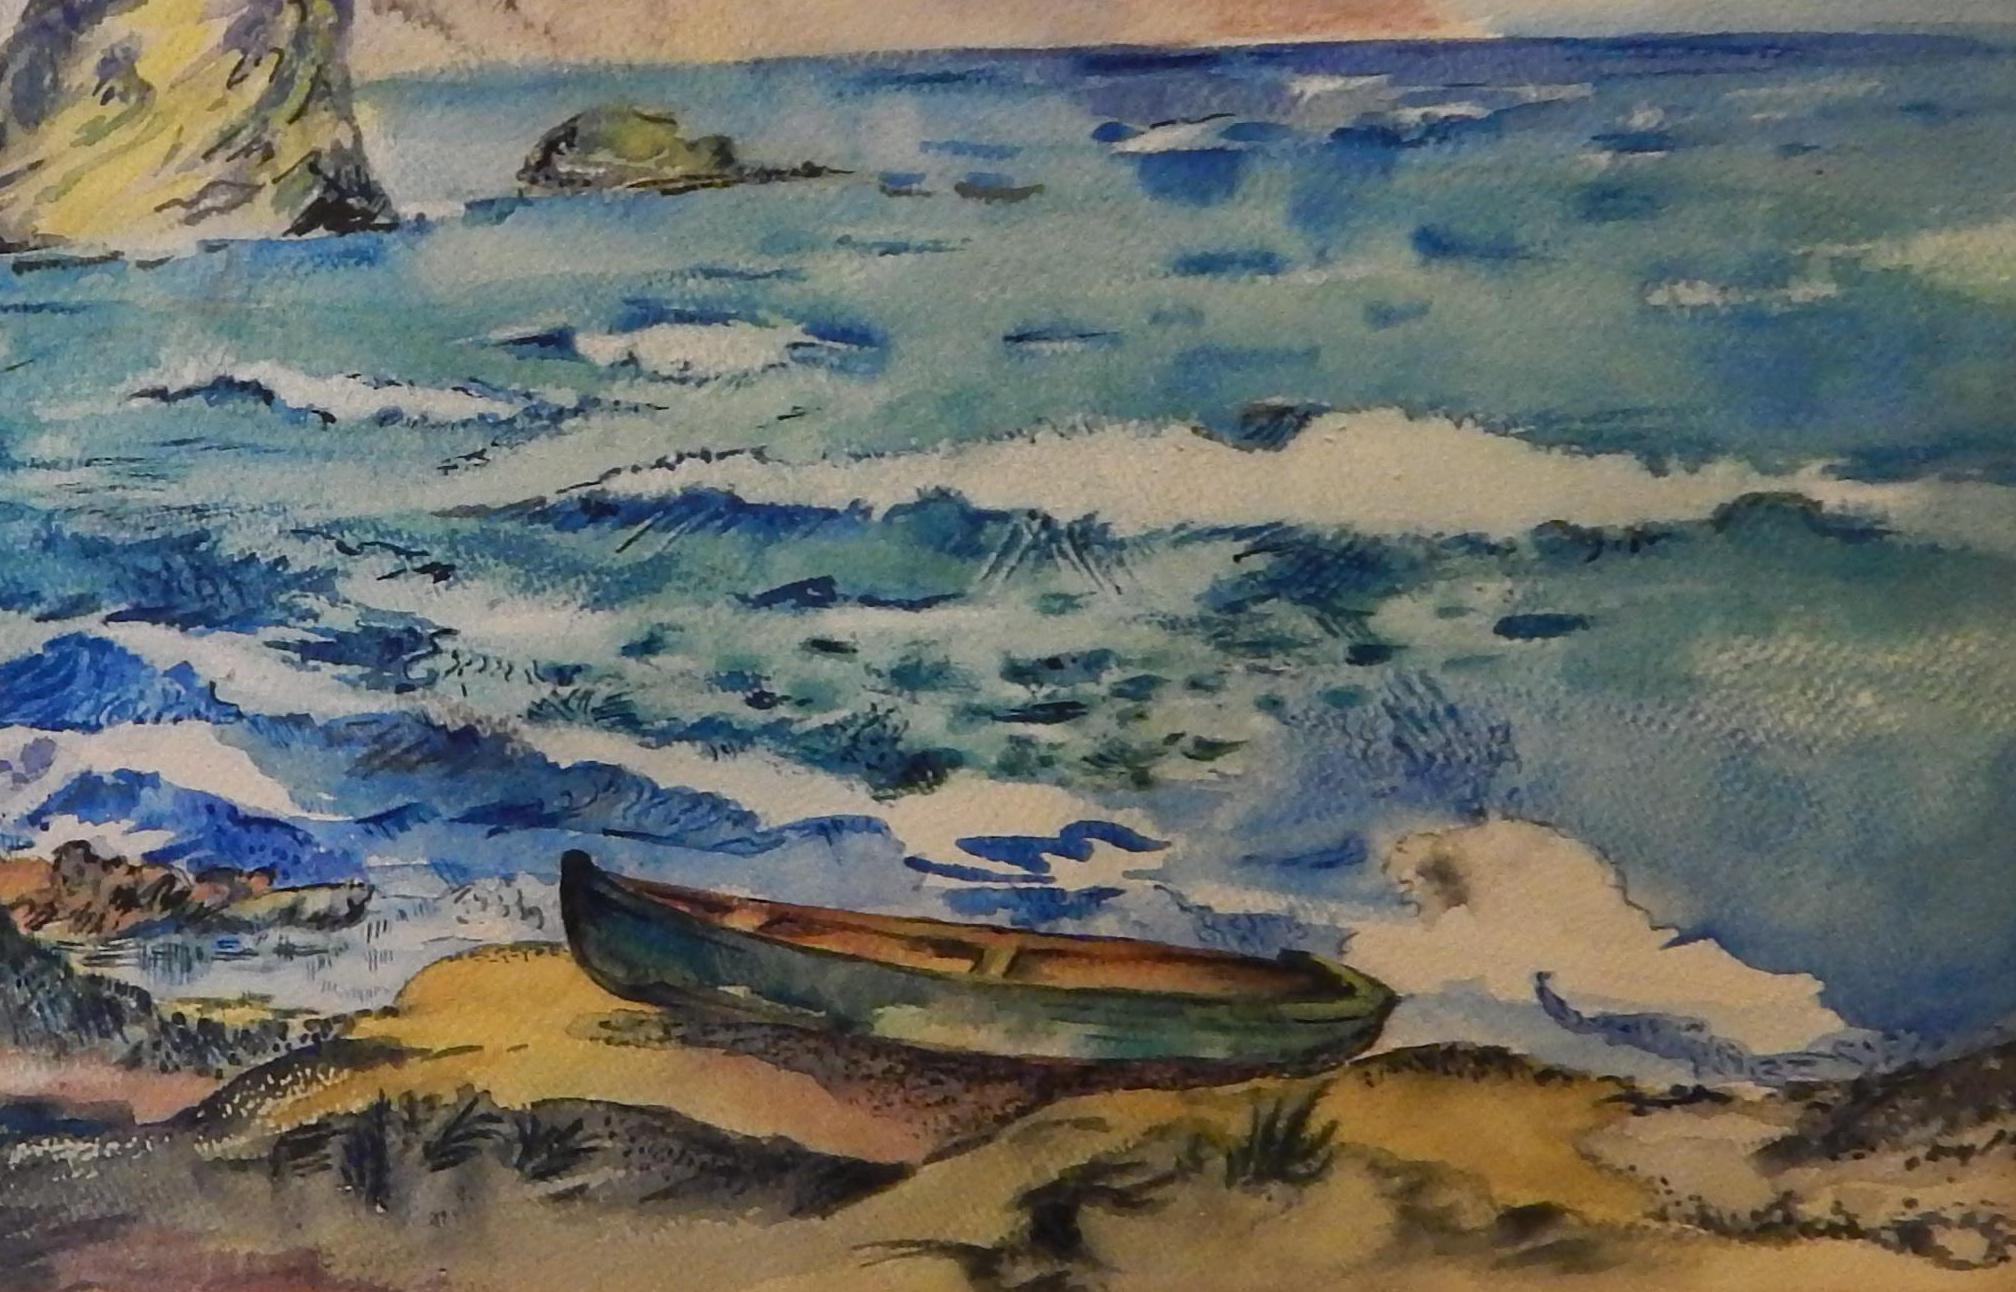 Unframed watercolor painting by Russian/New York artist David Burliuk (1882-1967)
Beautiful vivid color, in excellent condition and signed lower left.
Inscribed and dated 1947 on the verso. Measures: 17 1/4